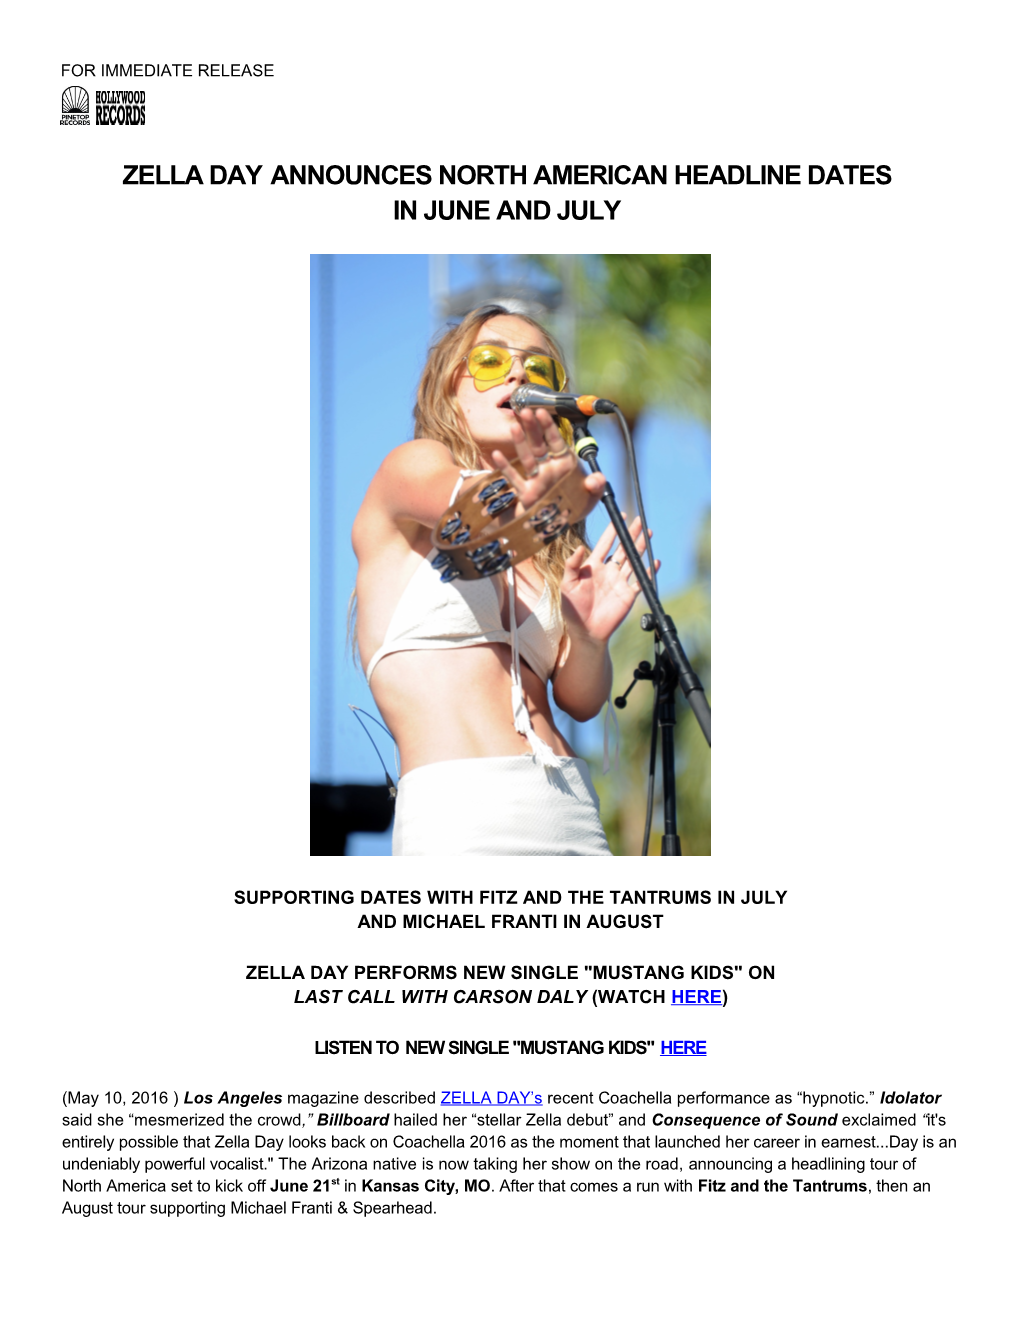 Zella Dayannounces North American Headlinedates in June and July